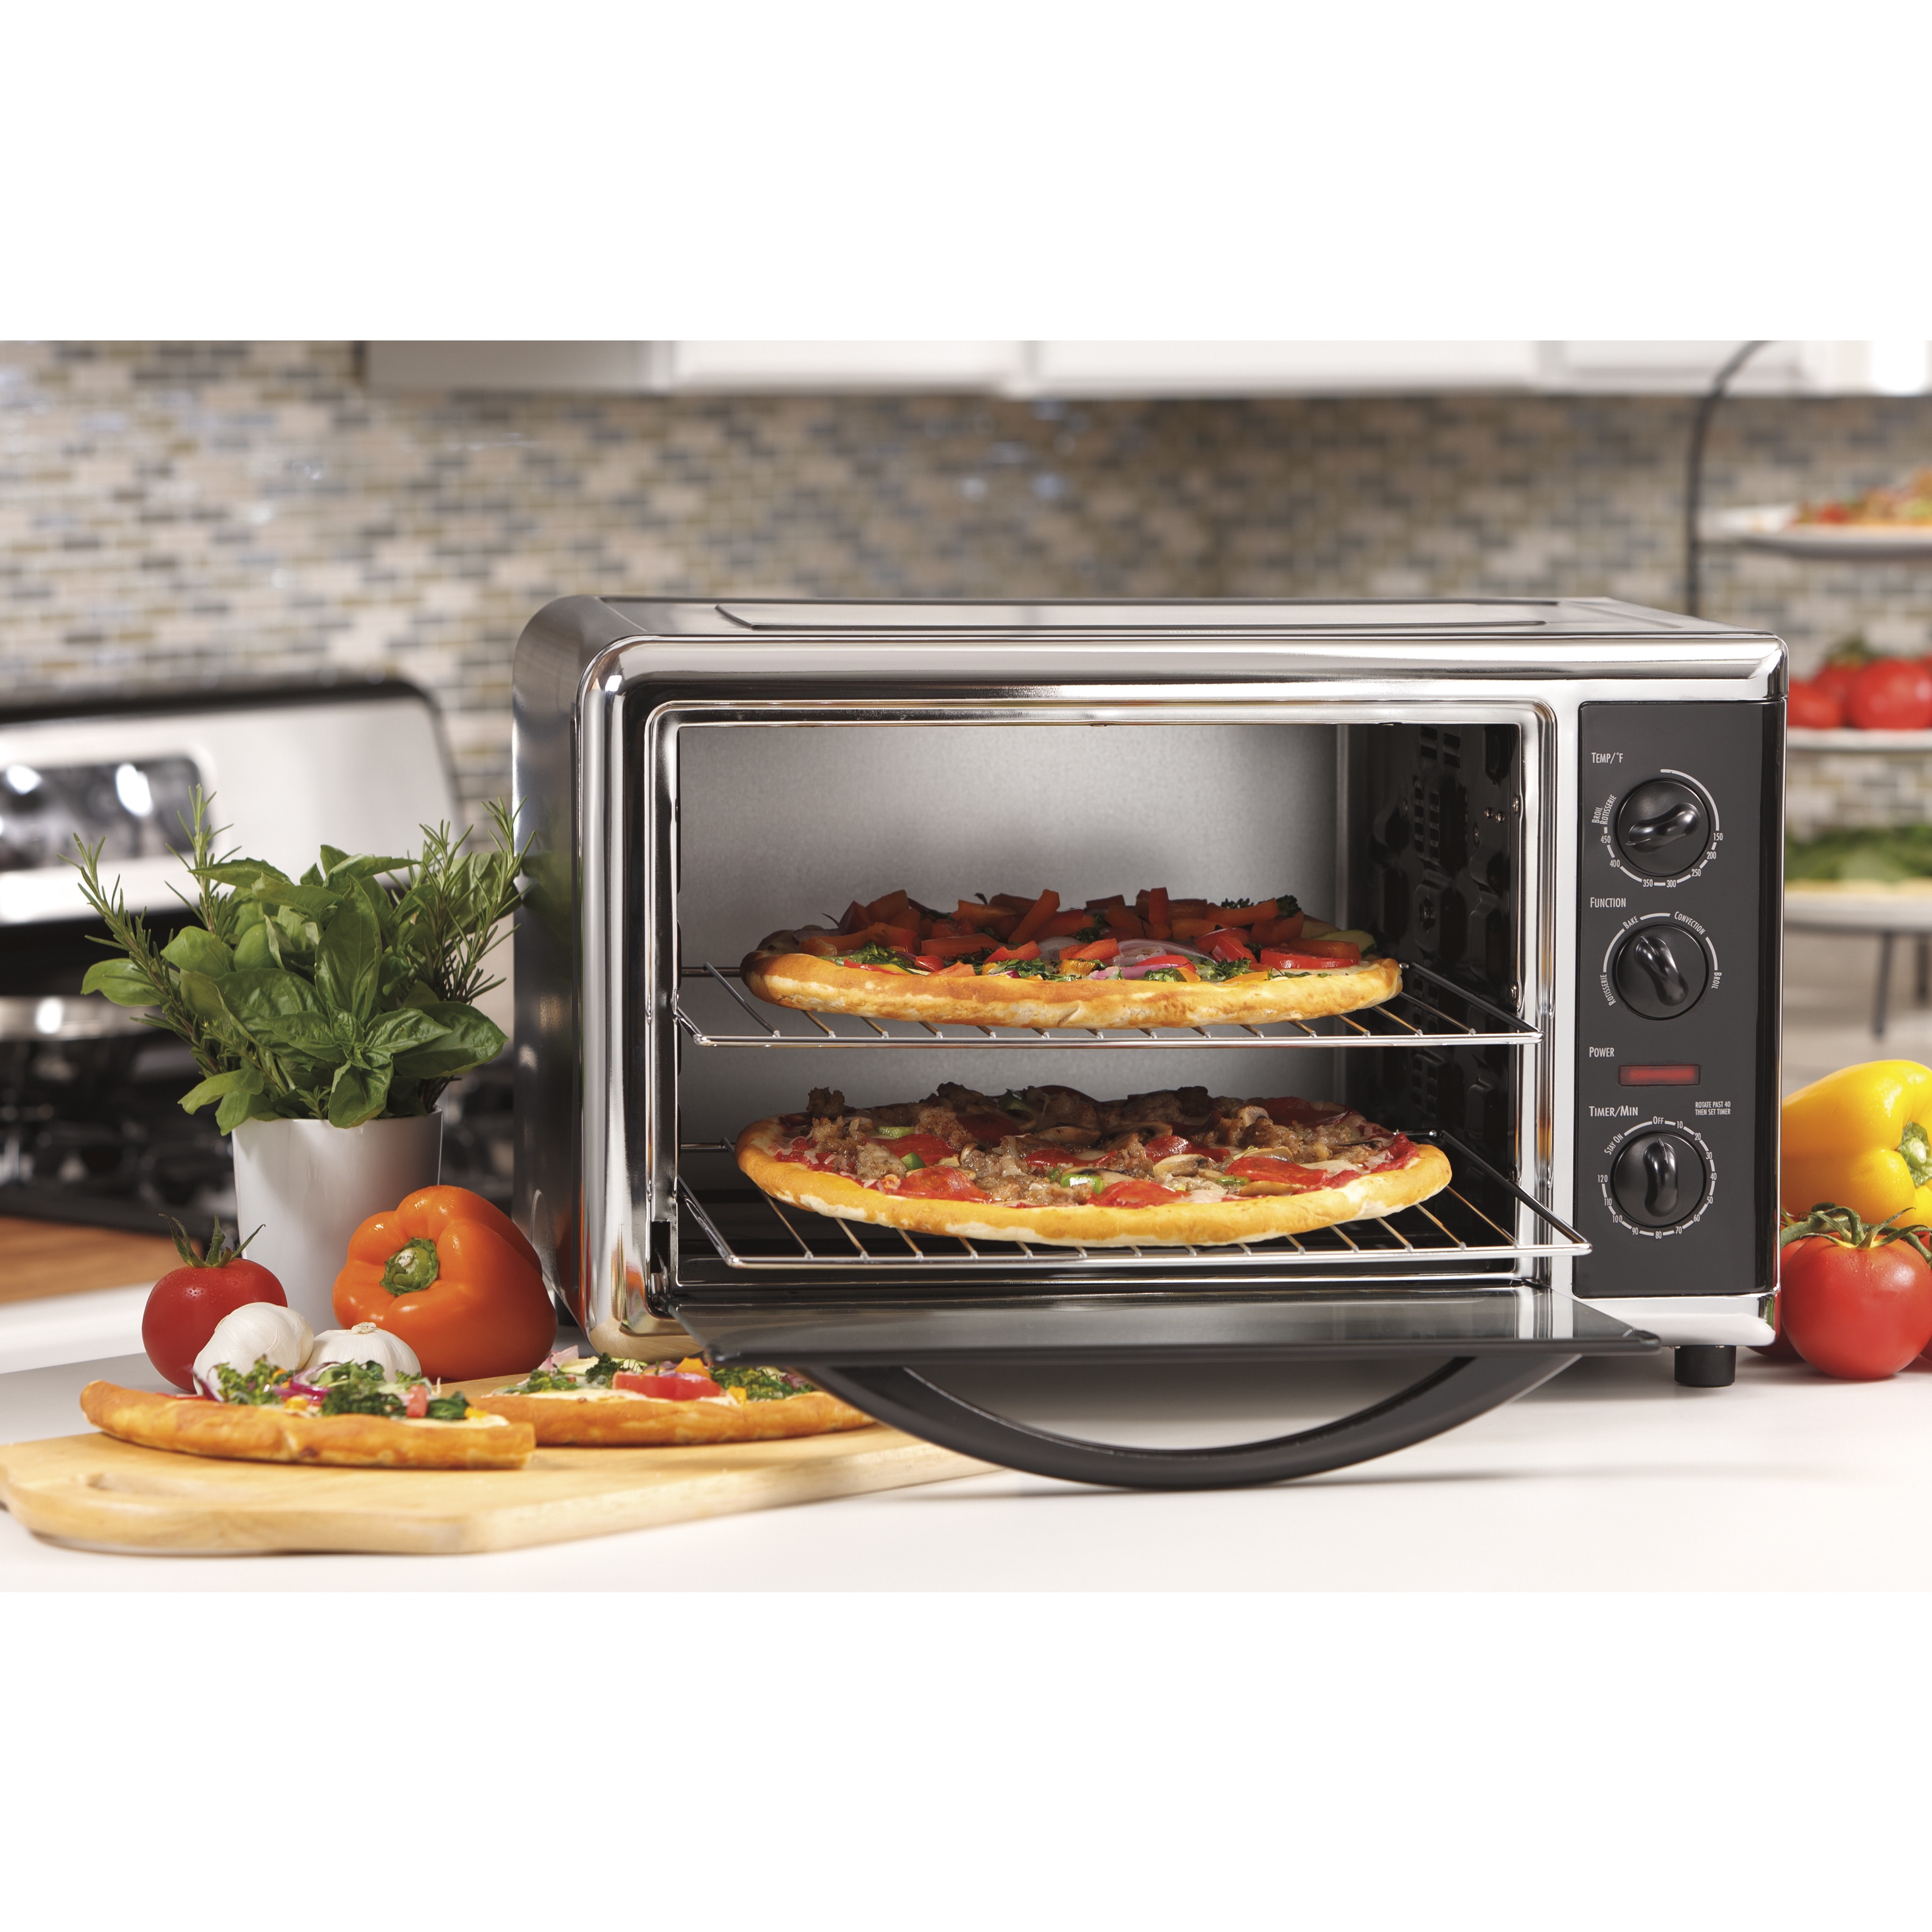 Hamilton Beach Sure Crisp Air Fryer With Rotisserie Oven, Toasters & Toaster  Ovens